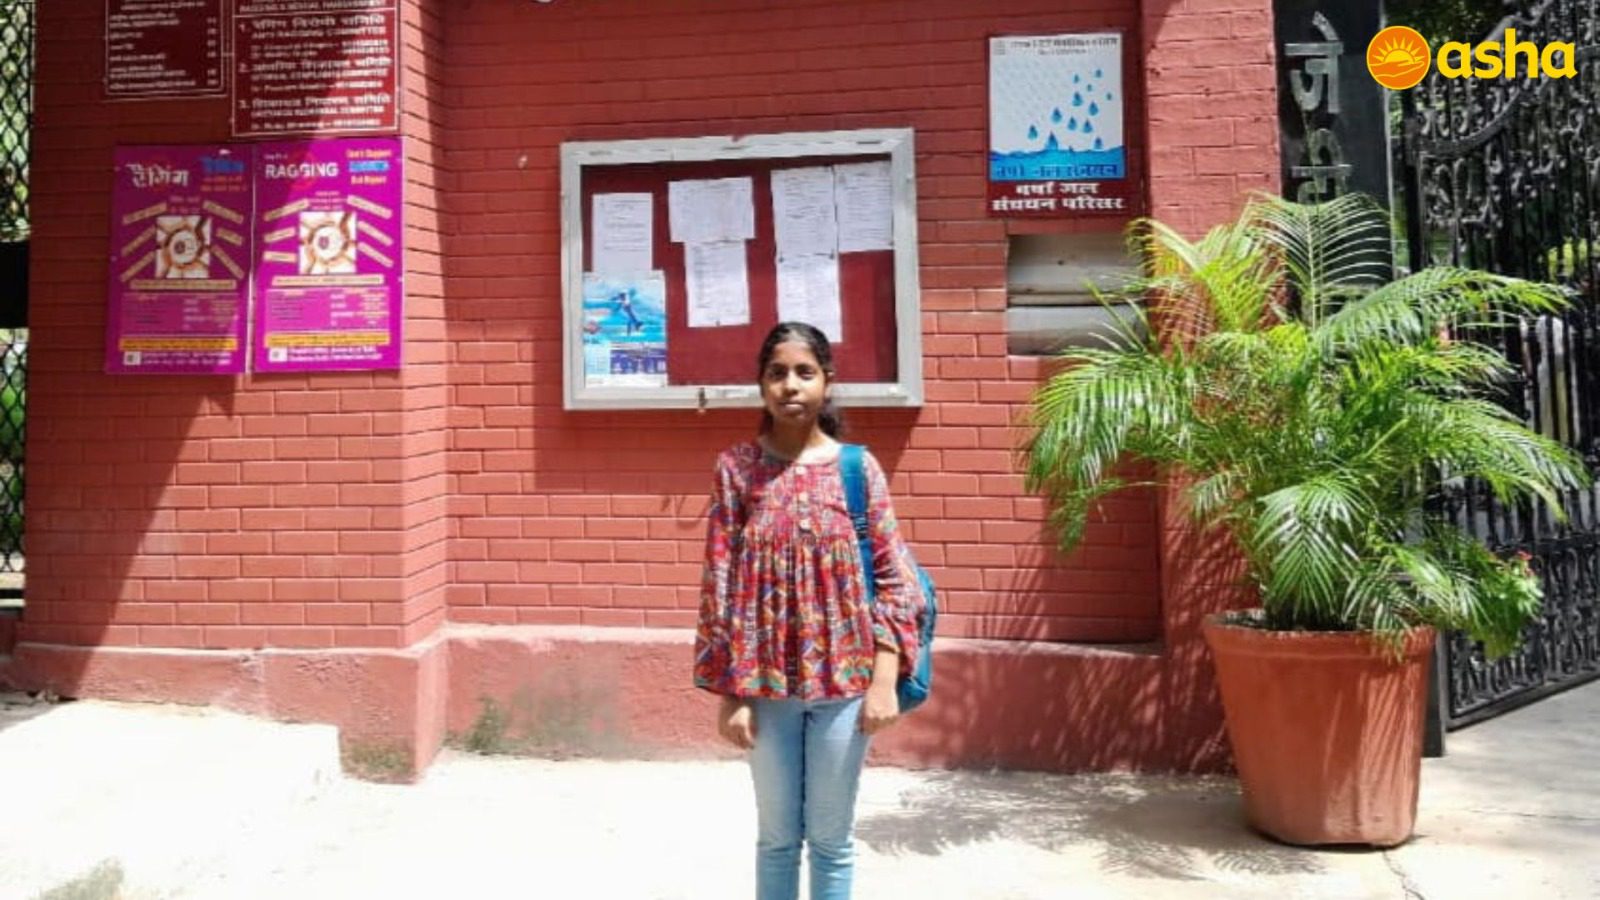 “When I was in Class 12, my life drastically took a new turn because of my association with Asha”.- Asha Ambassador Venugopal